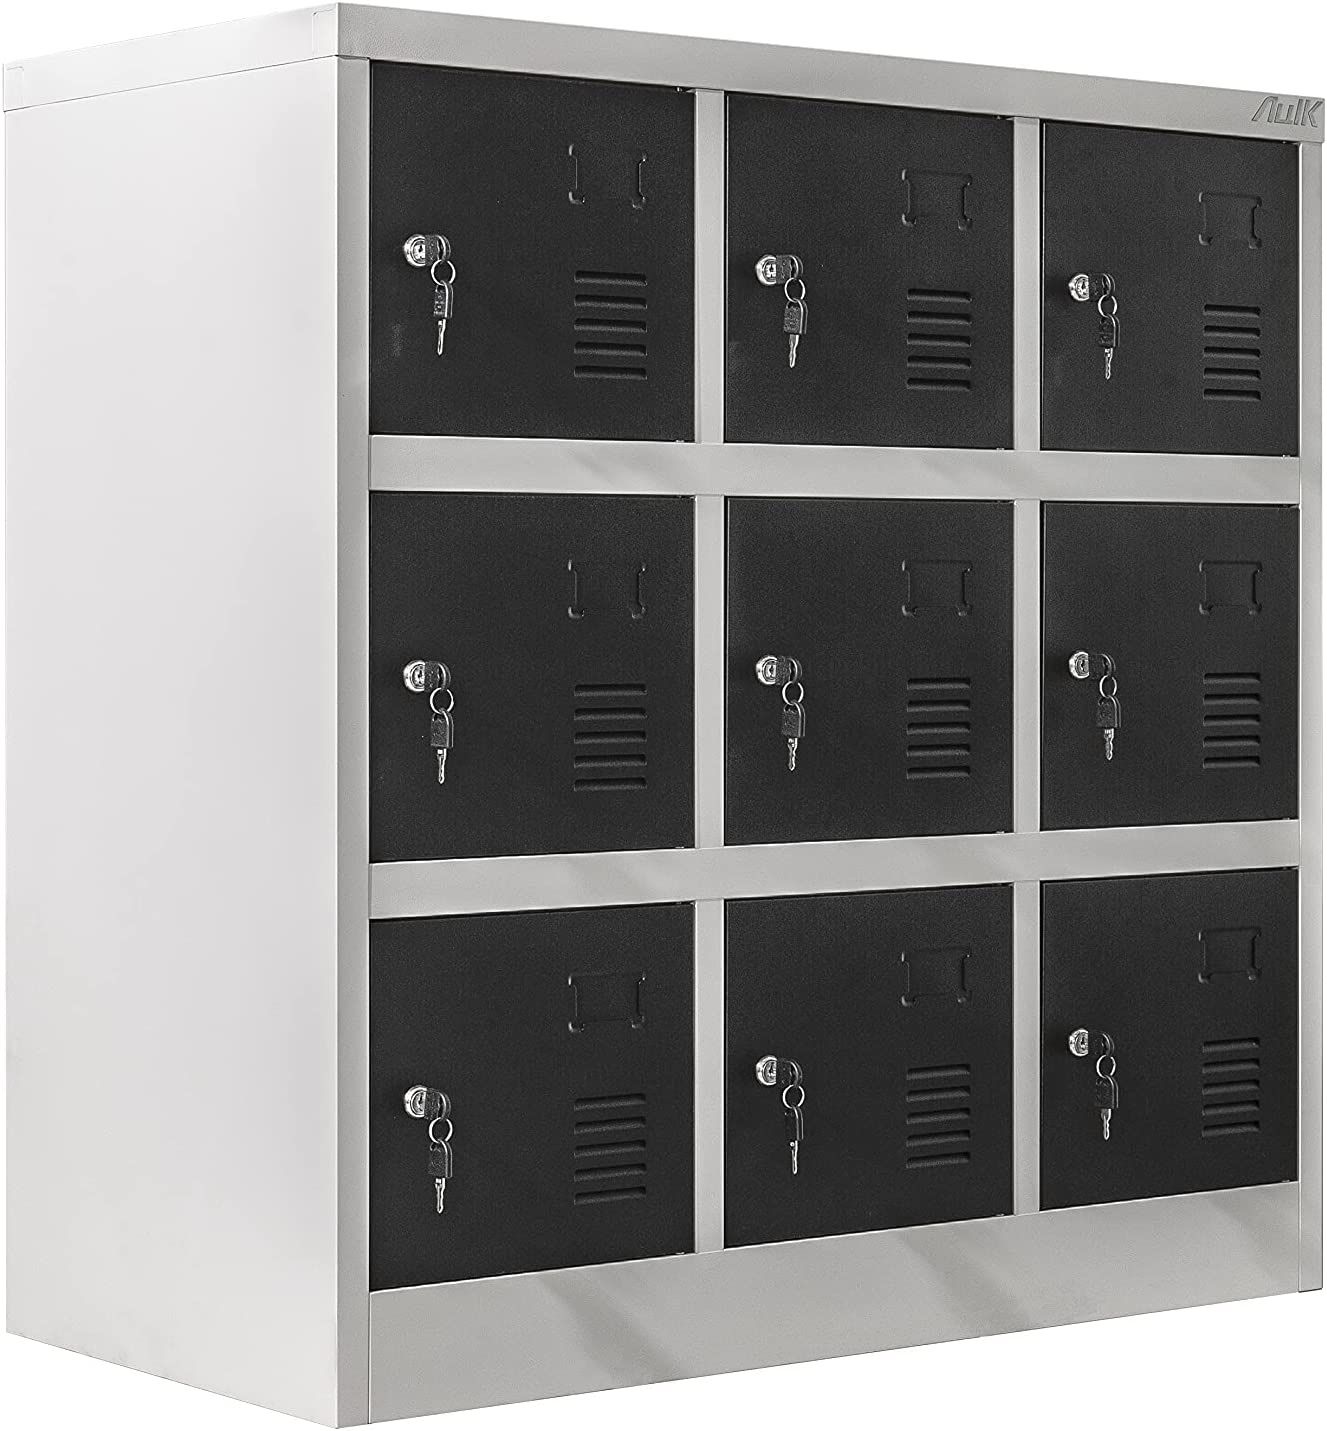 Metal Locker Storage Cabinet with 9 Doors, 36‘’H Cabinet Organizer for School, Gym, Home and Office (Black Door) - Assembly Required